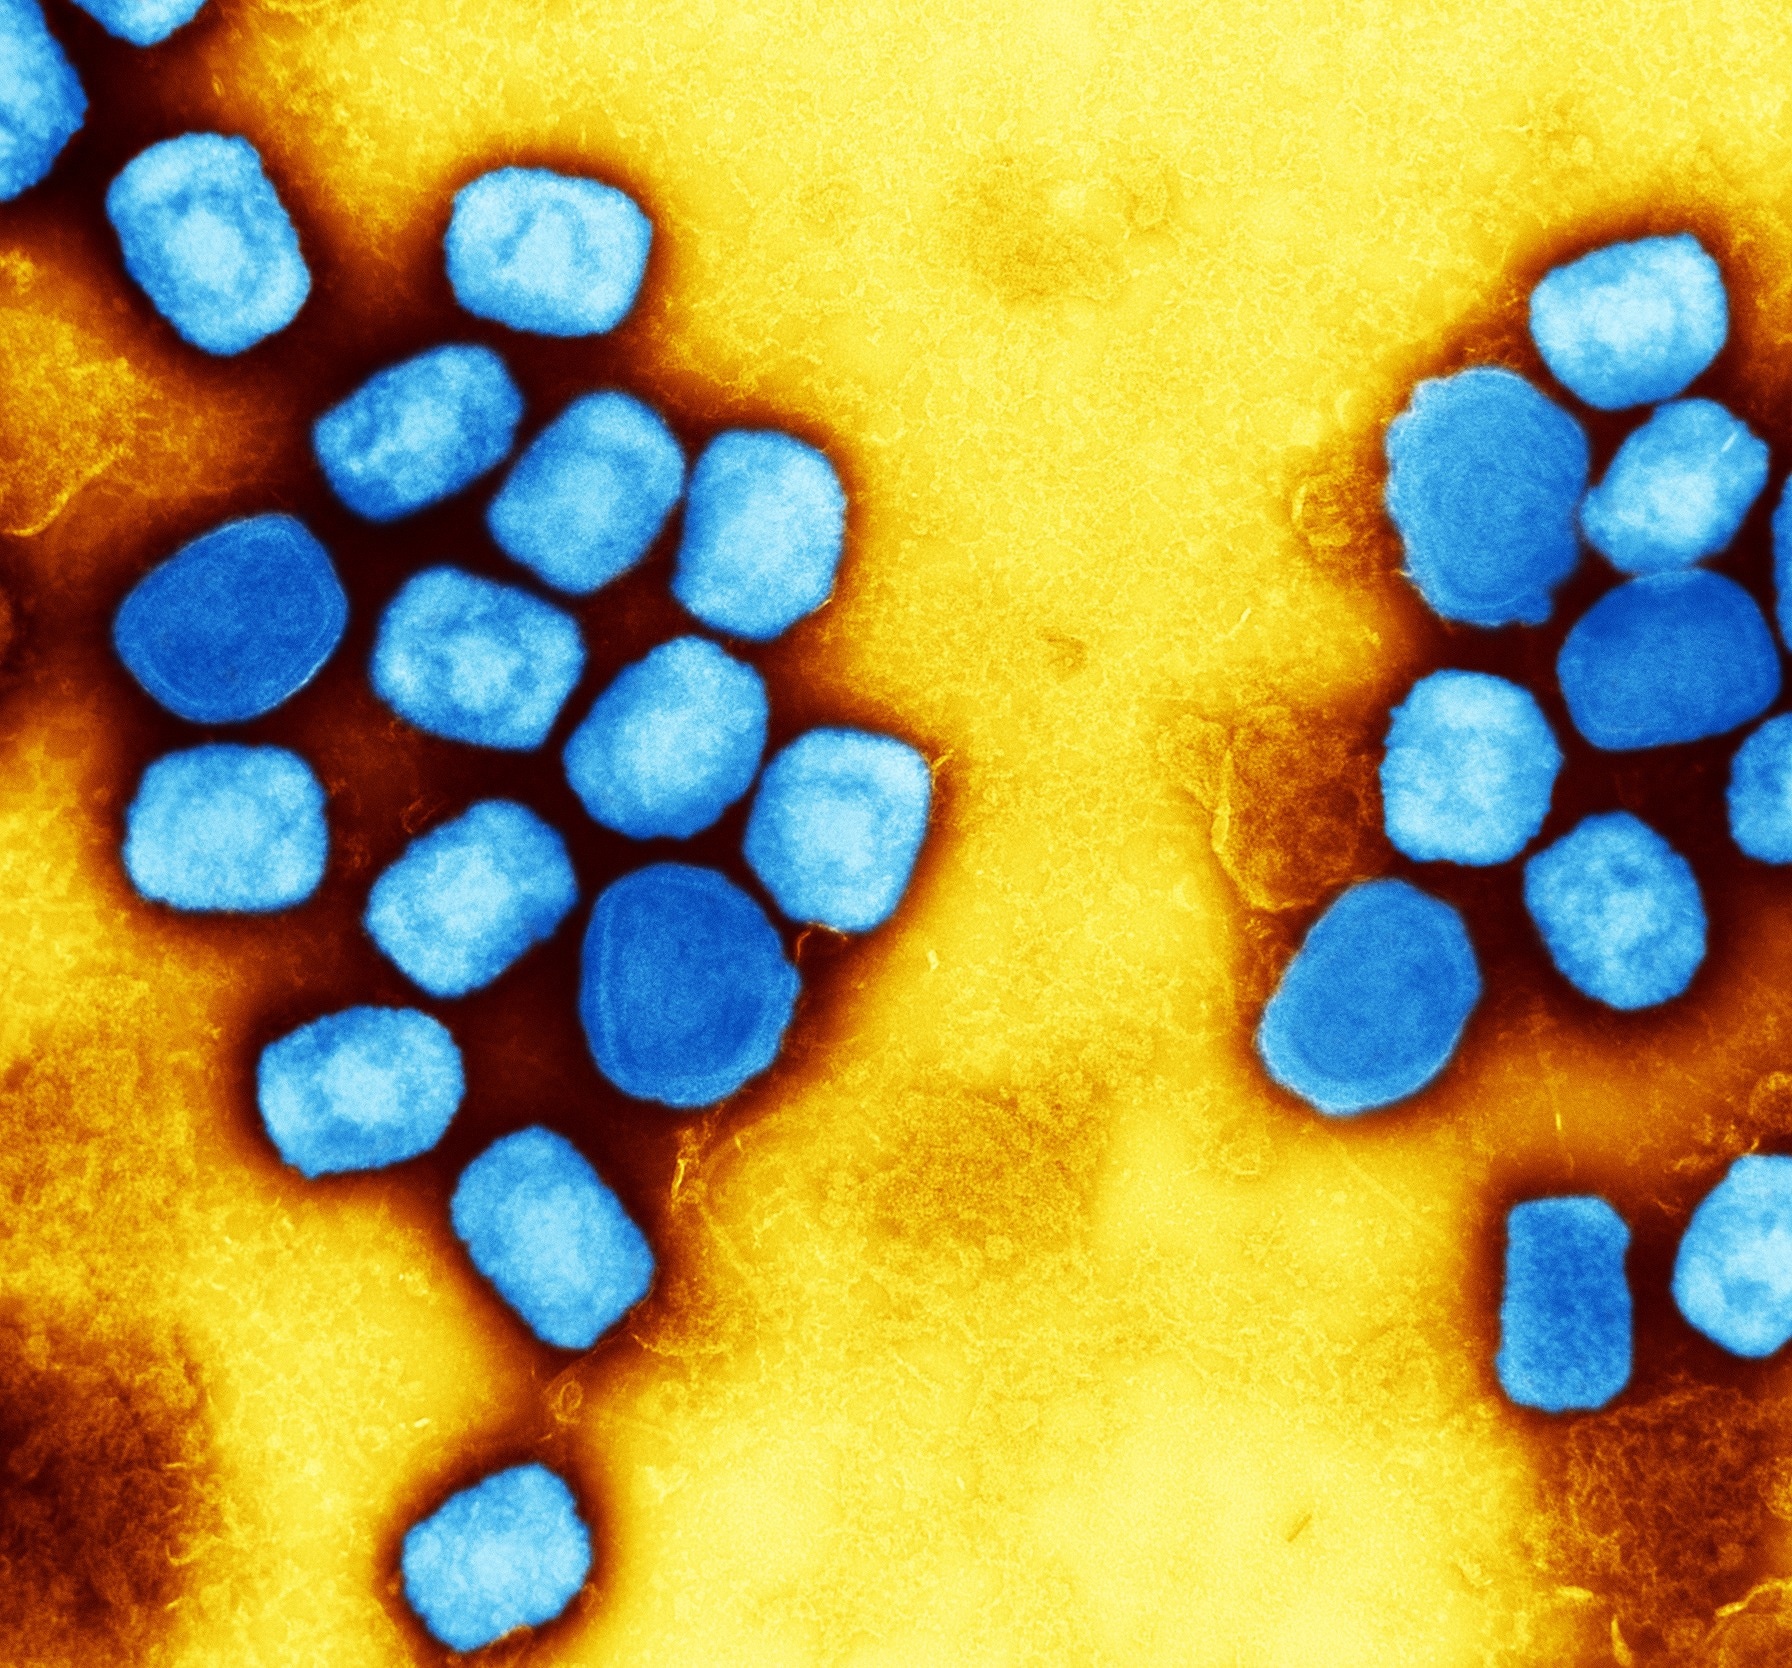 The electron micrographs transmit the color of chickenpox virus (blue) particles cultured and purified from cell culture.  Image taken at the NIAID Integrated Research Facility (IRF) in Fort Detrick, Maryland. Credit: NIAID.